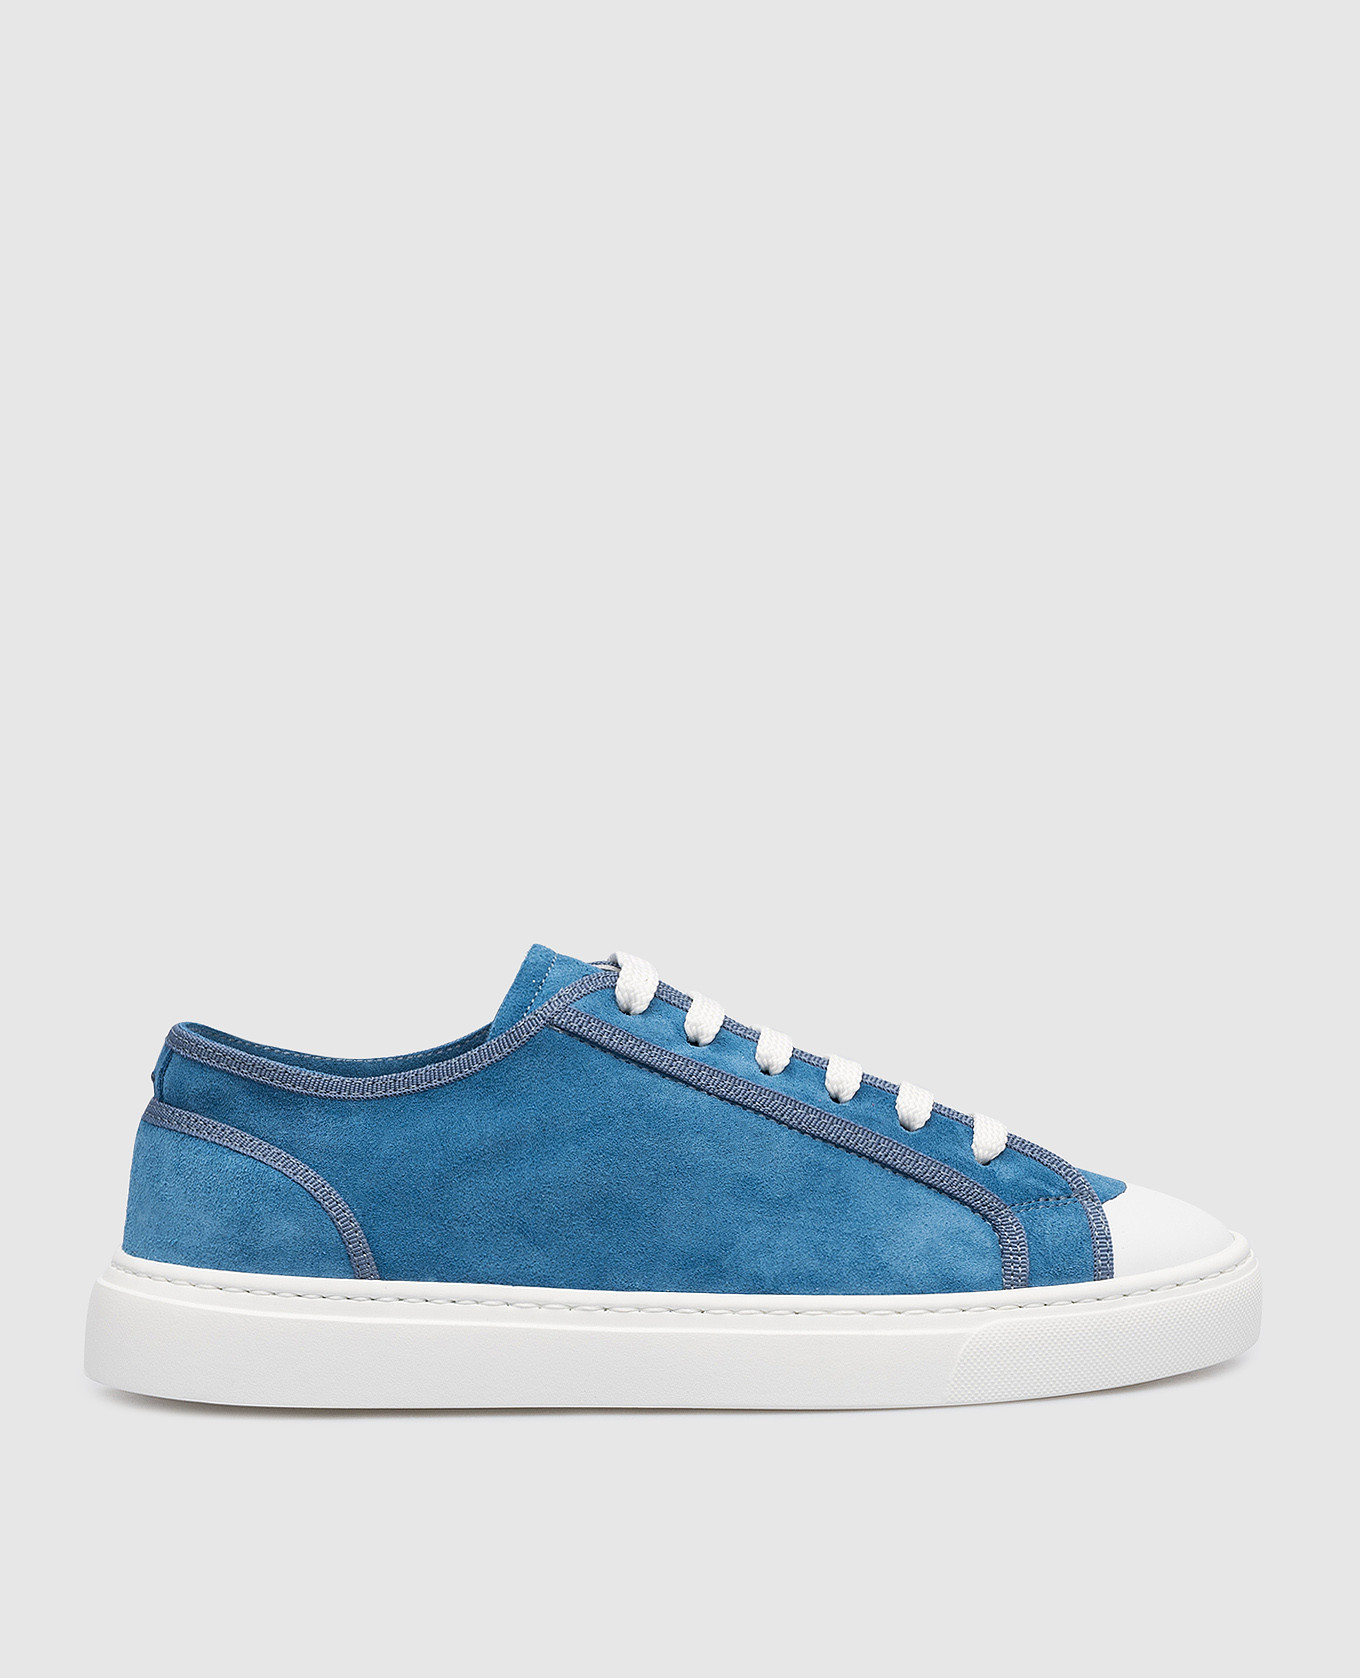 Blue suede sneakers with embossed logo